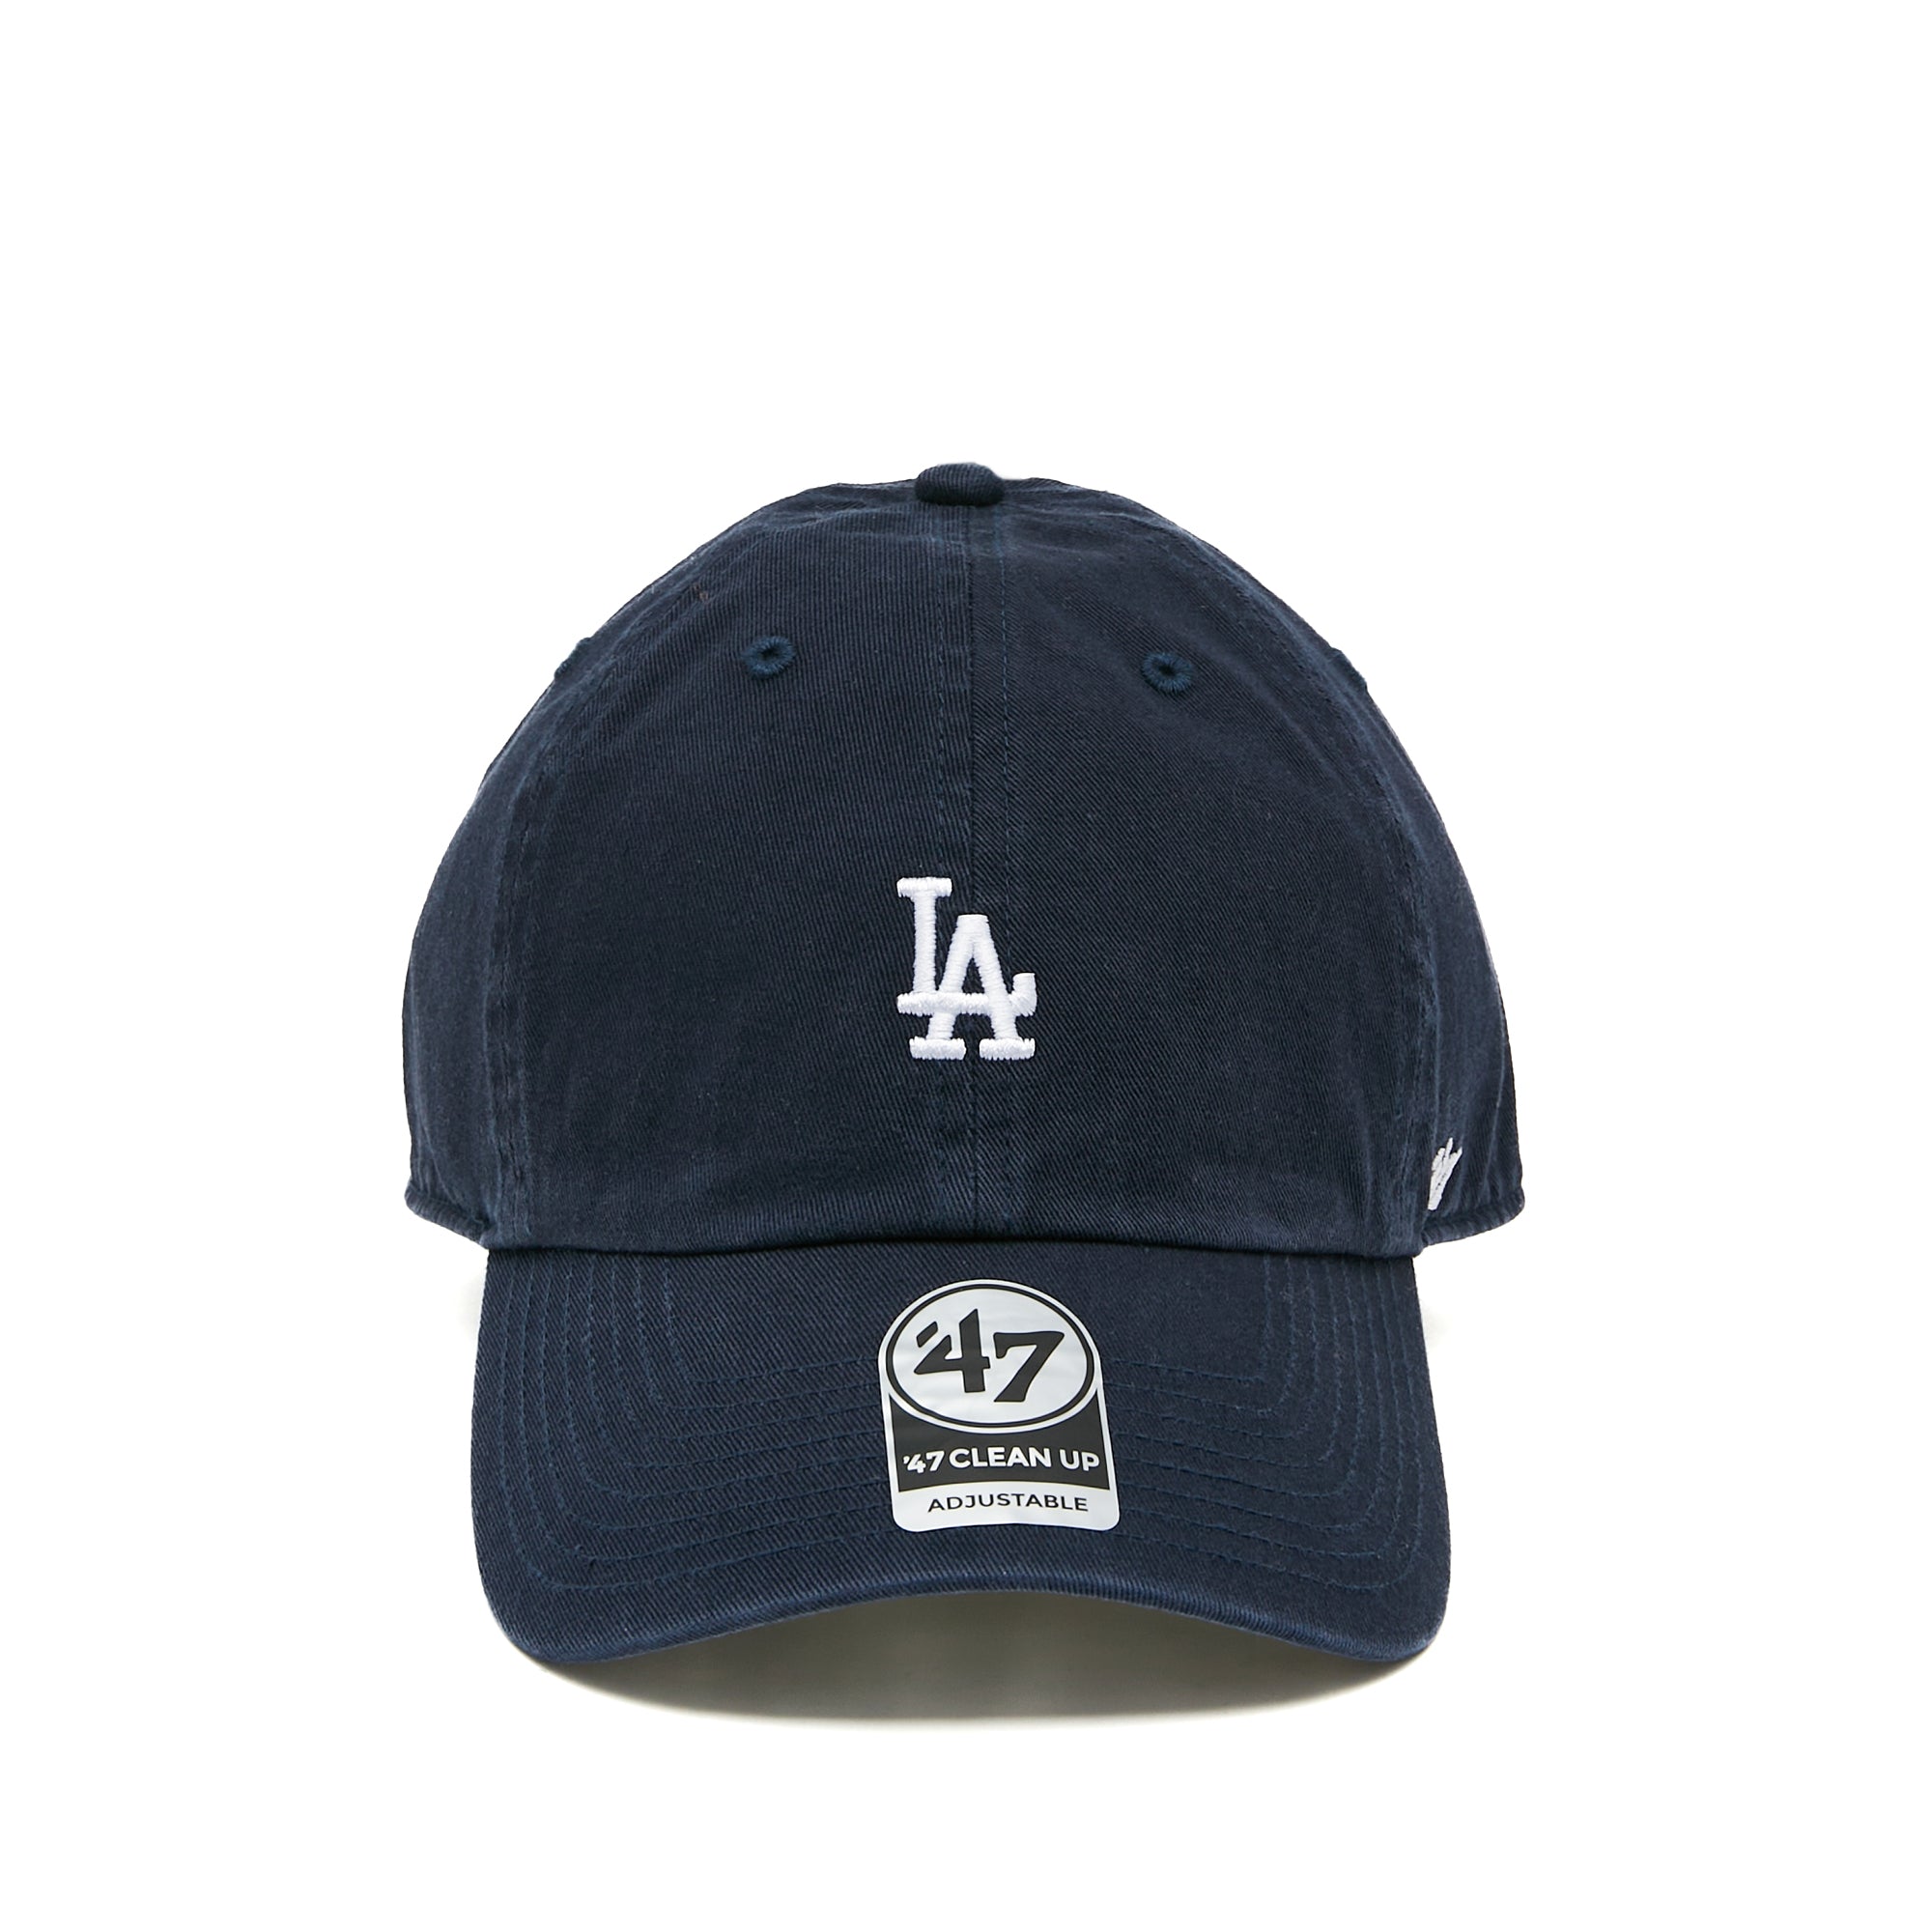 MLB Los Angeles Dodgers Base Runner Cap Navy One Size